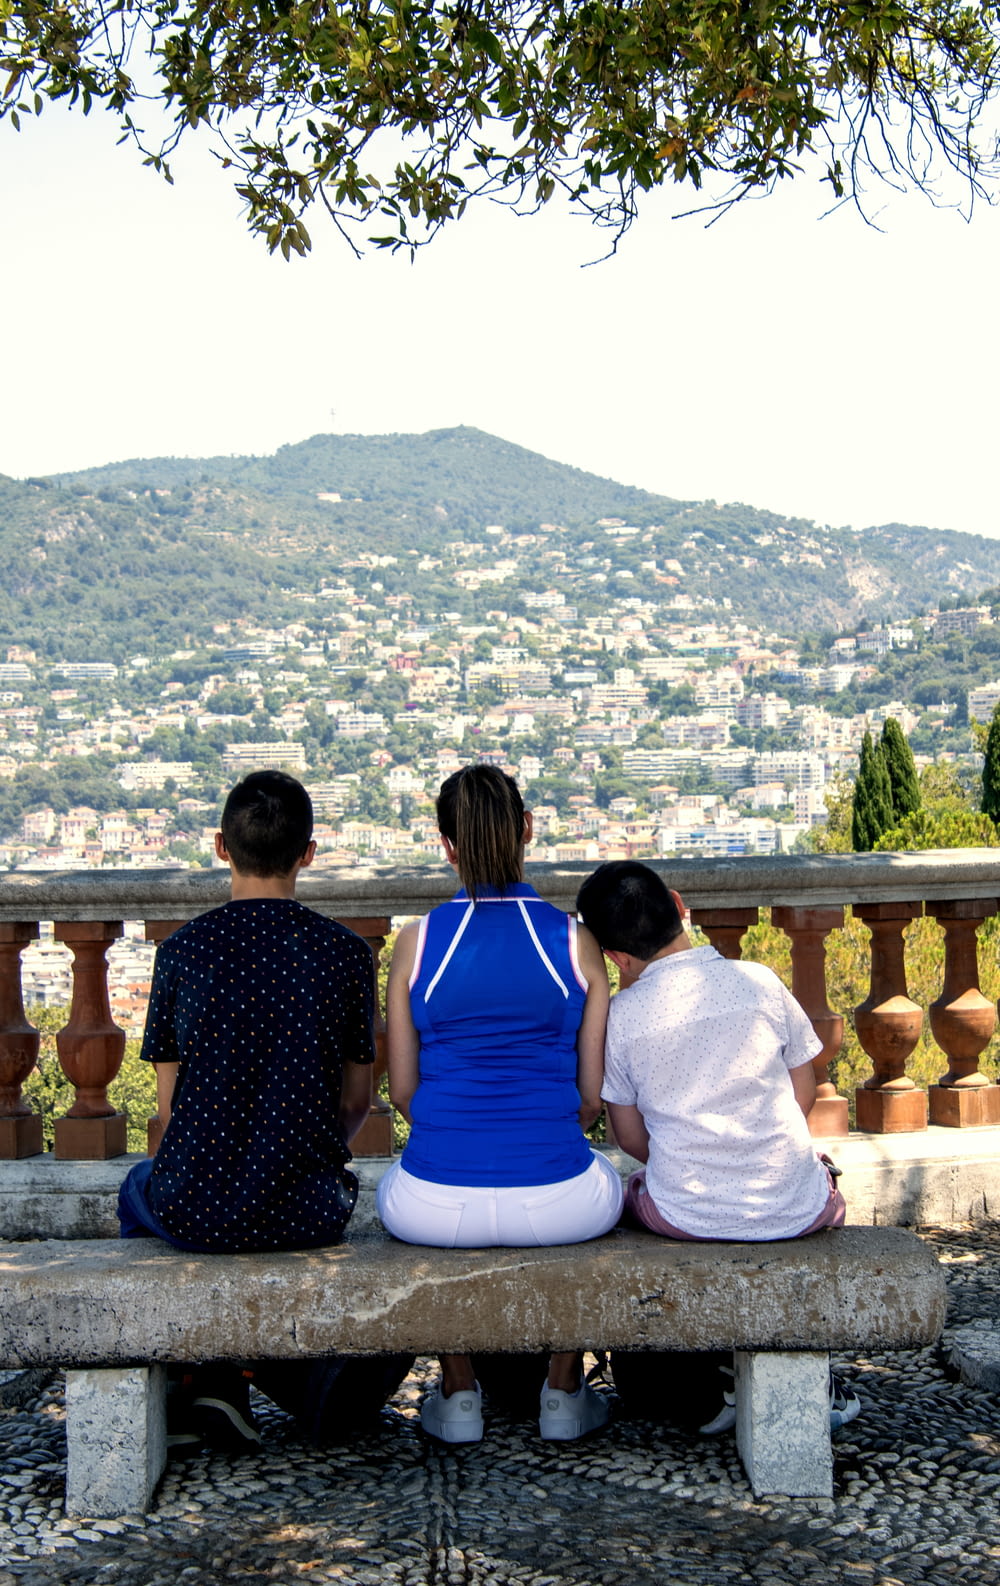 three people sitting on a bench overlooking a city